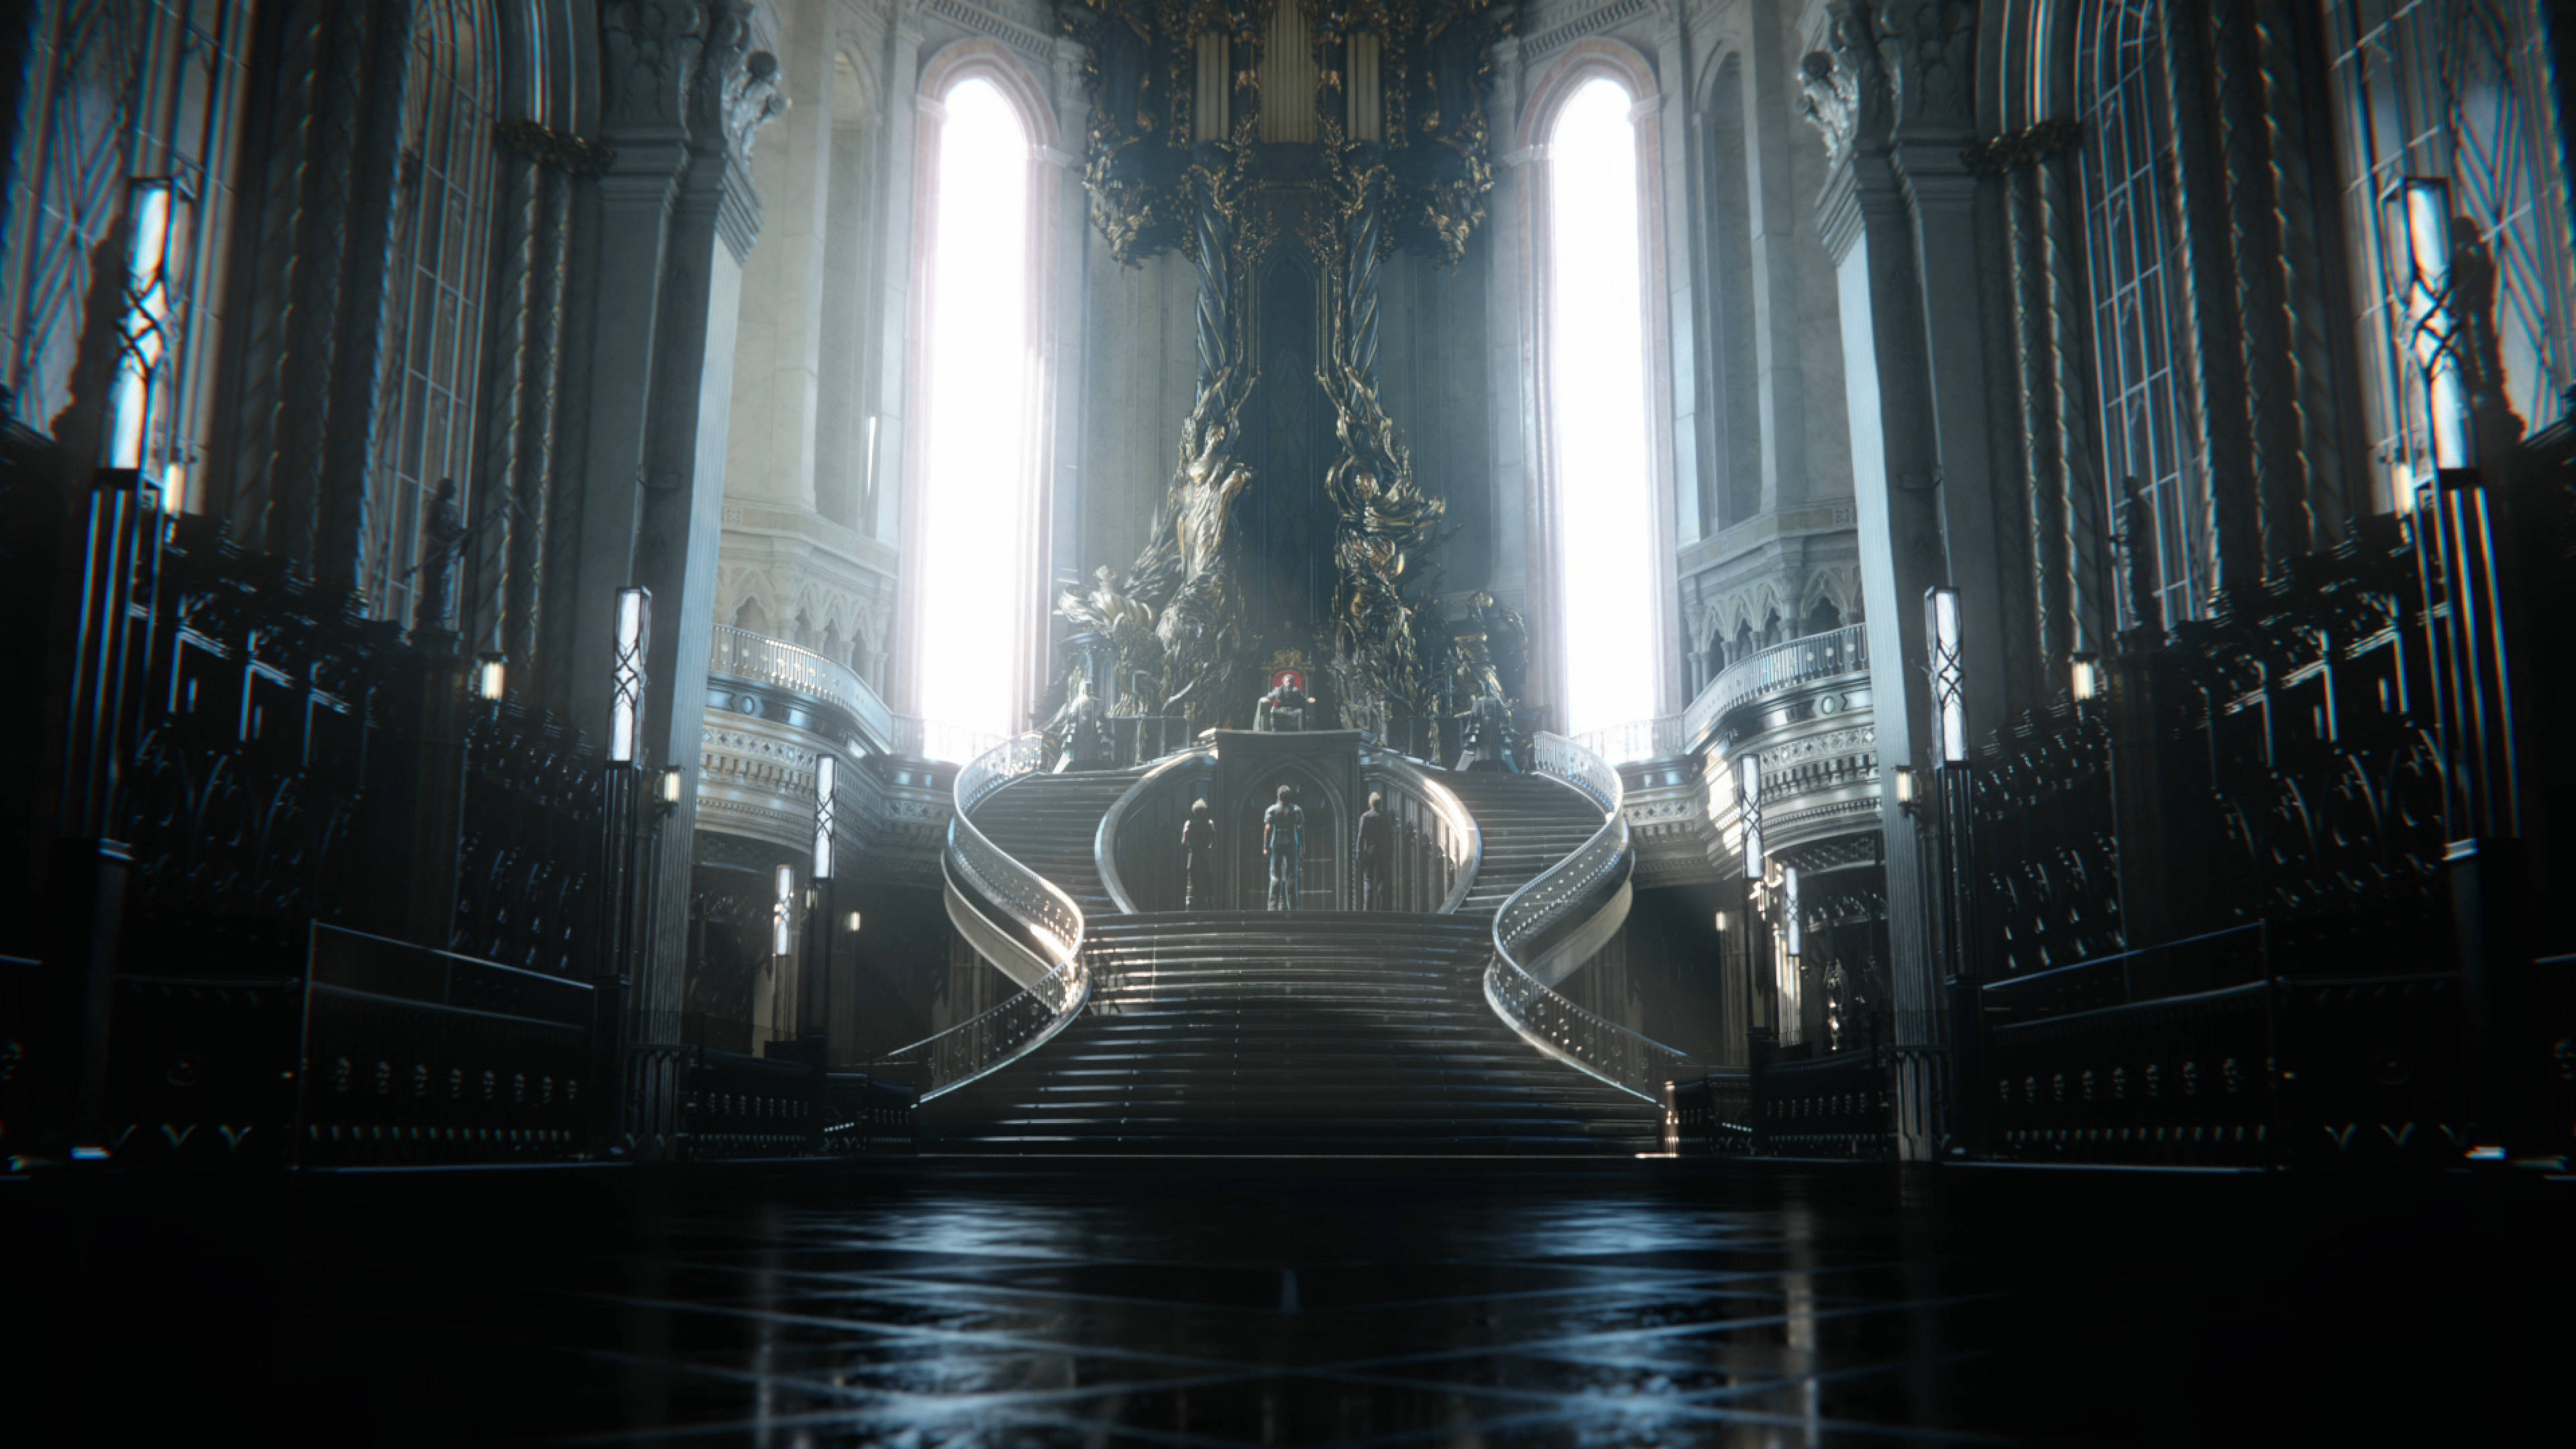 150+ Final Fantasy XV HD Wallpapers and Backgrounds